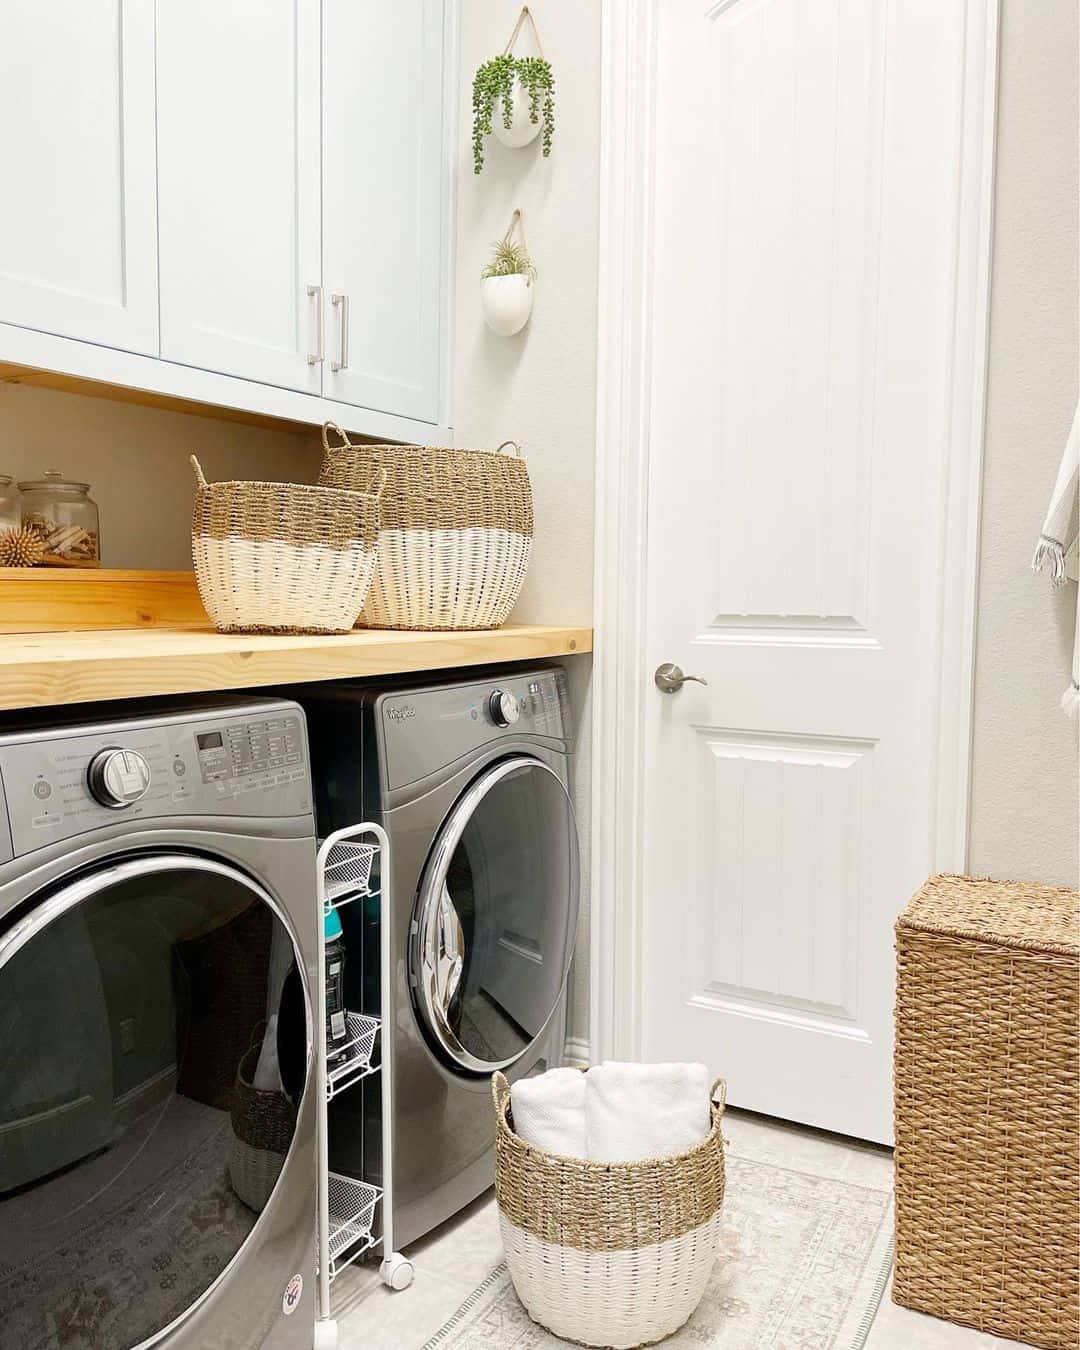 30 Modern Laundry Room Ideas to Make Your Chores More Enjoyable